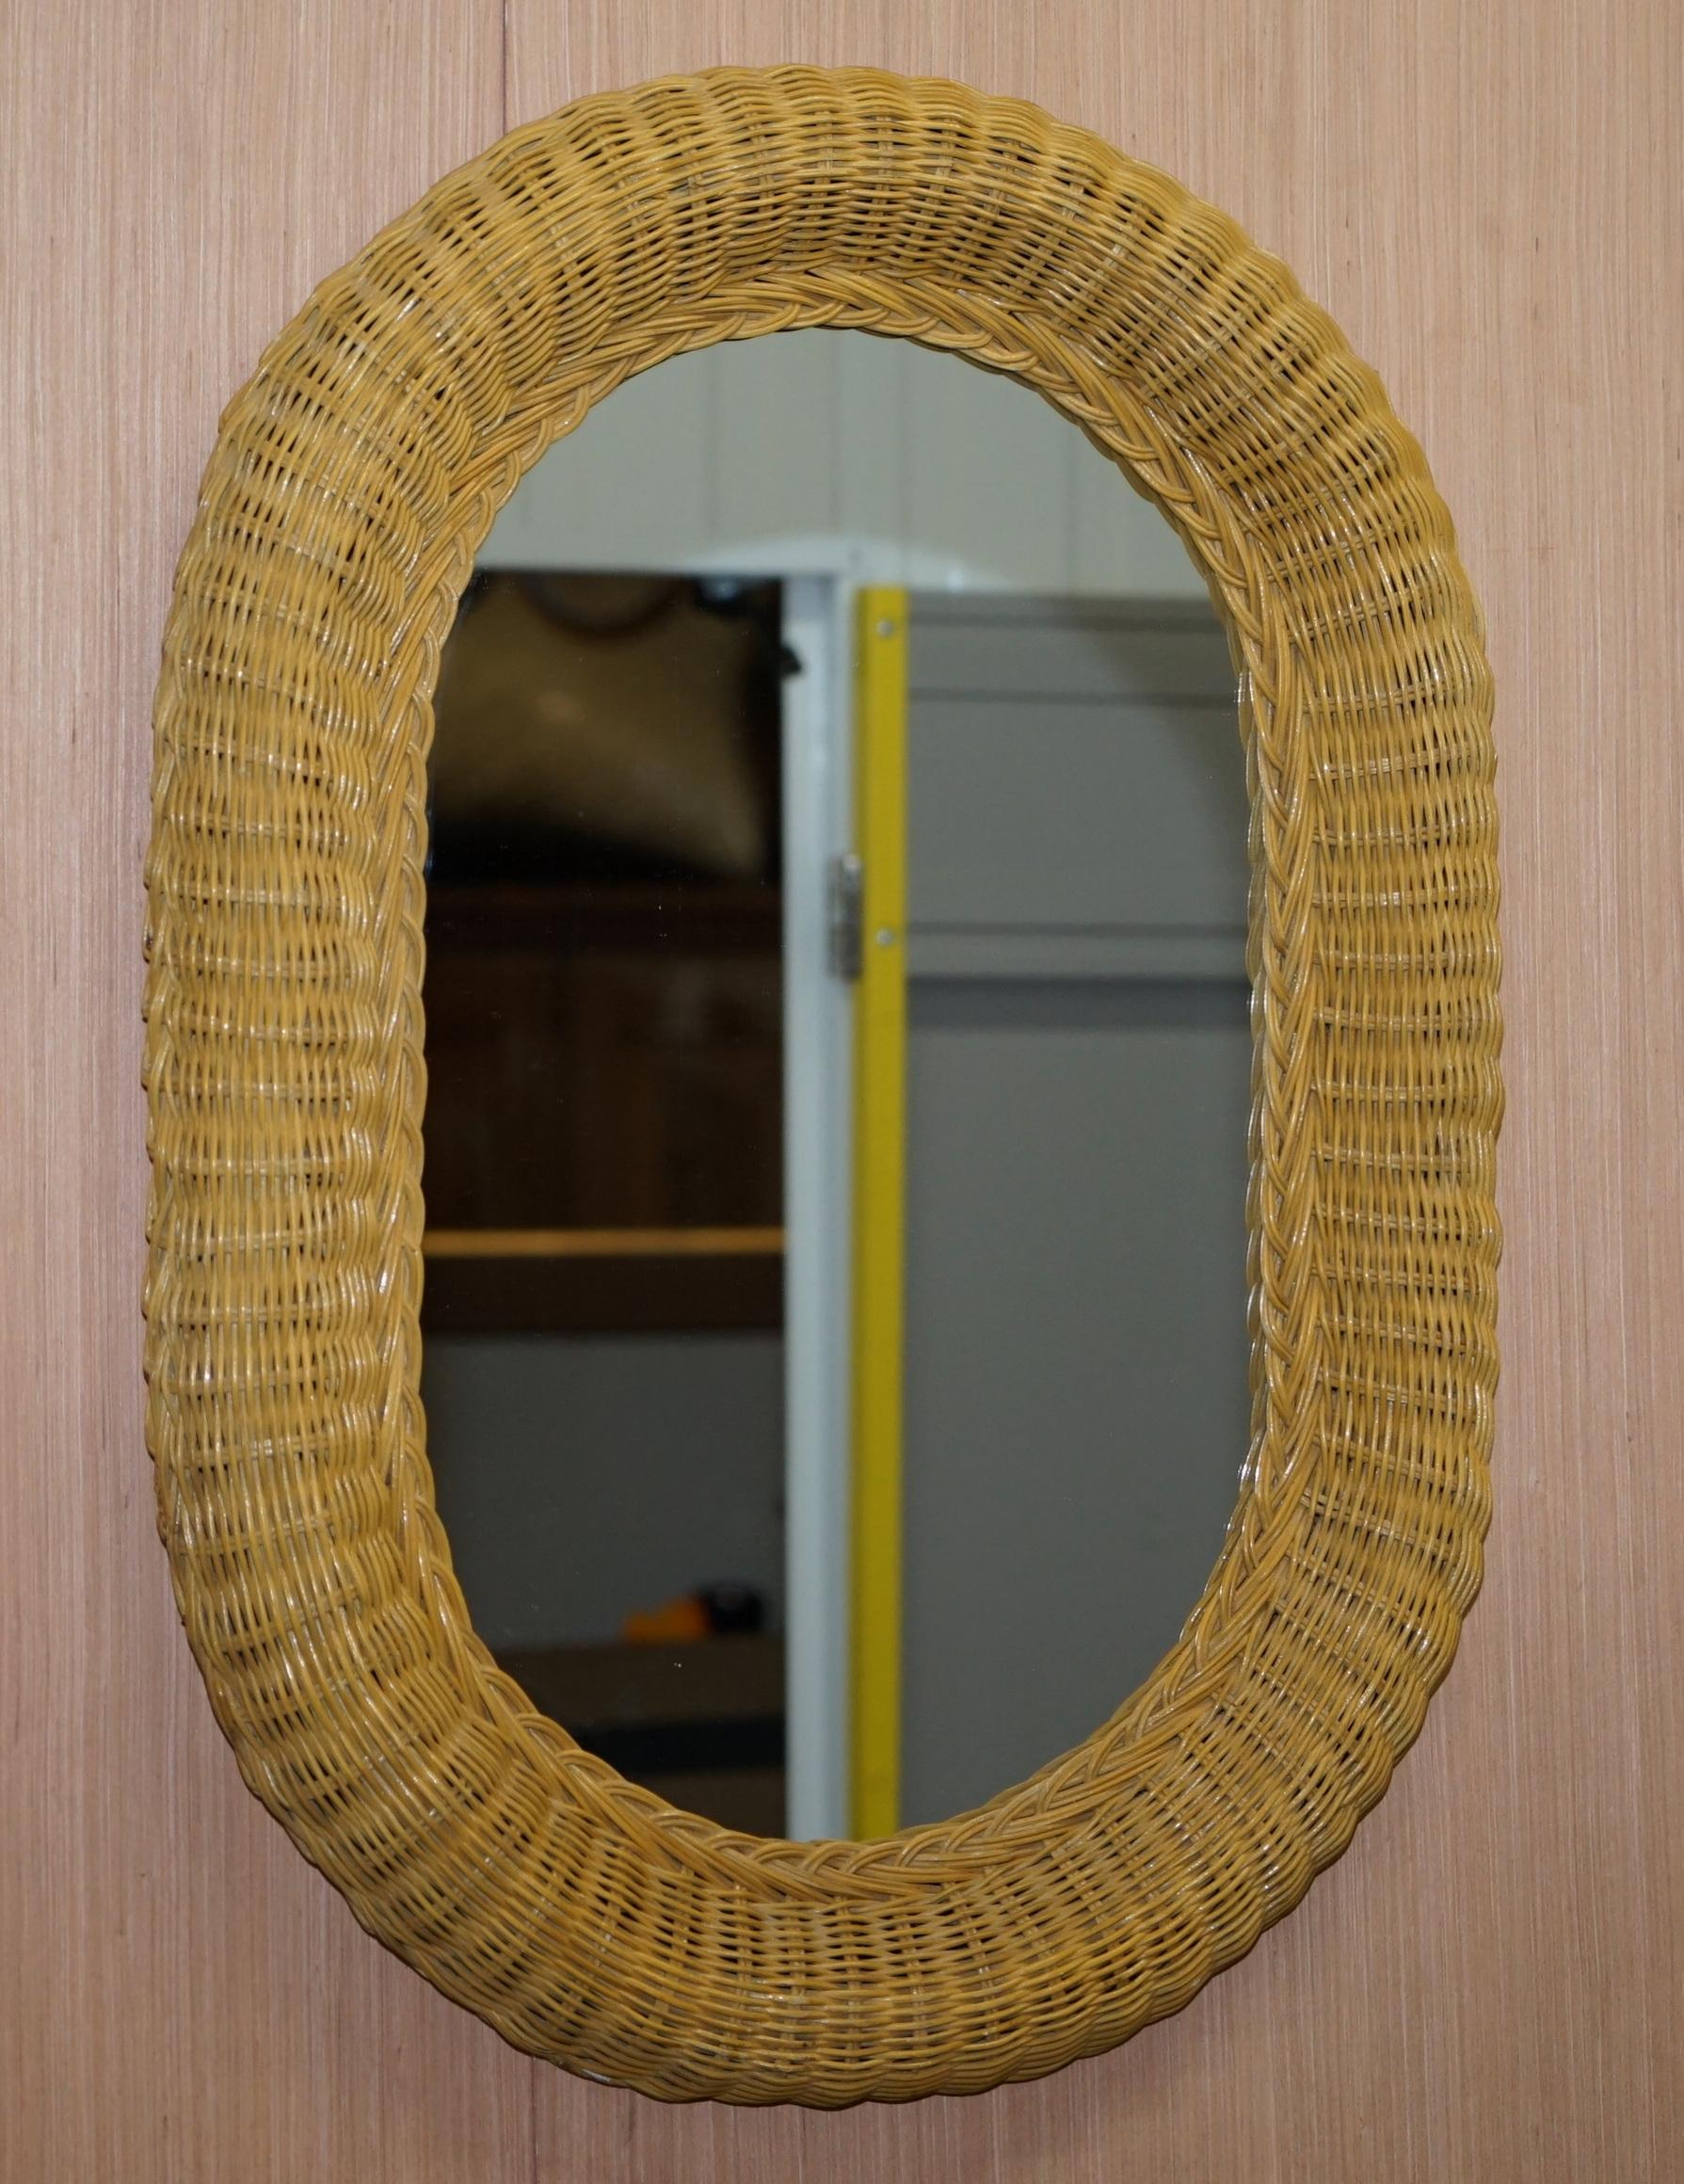 We are delighted to offer for sale this very nice oval wall mirror with rattan frame

A very good looking and decorative mirror in perfect condition, it can of course be hung horizontally and vertically 

Dimensions:

Height 72cm

Width